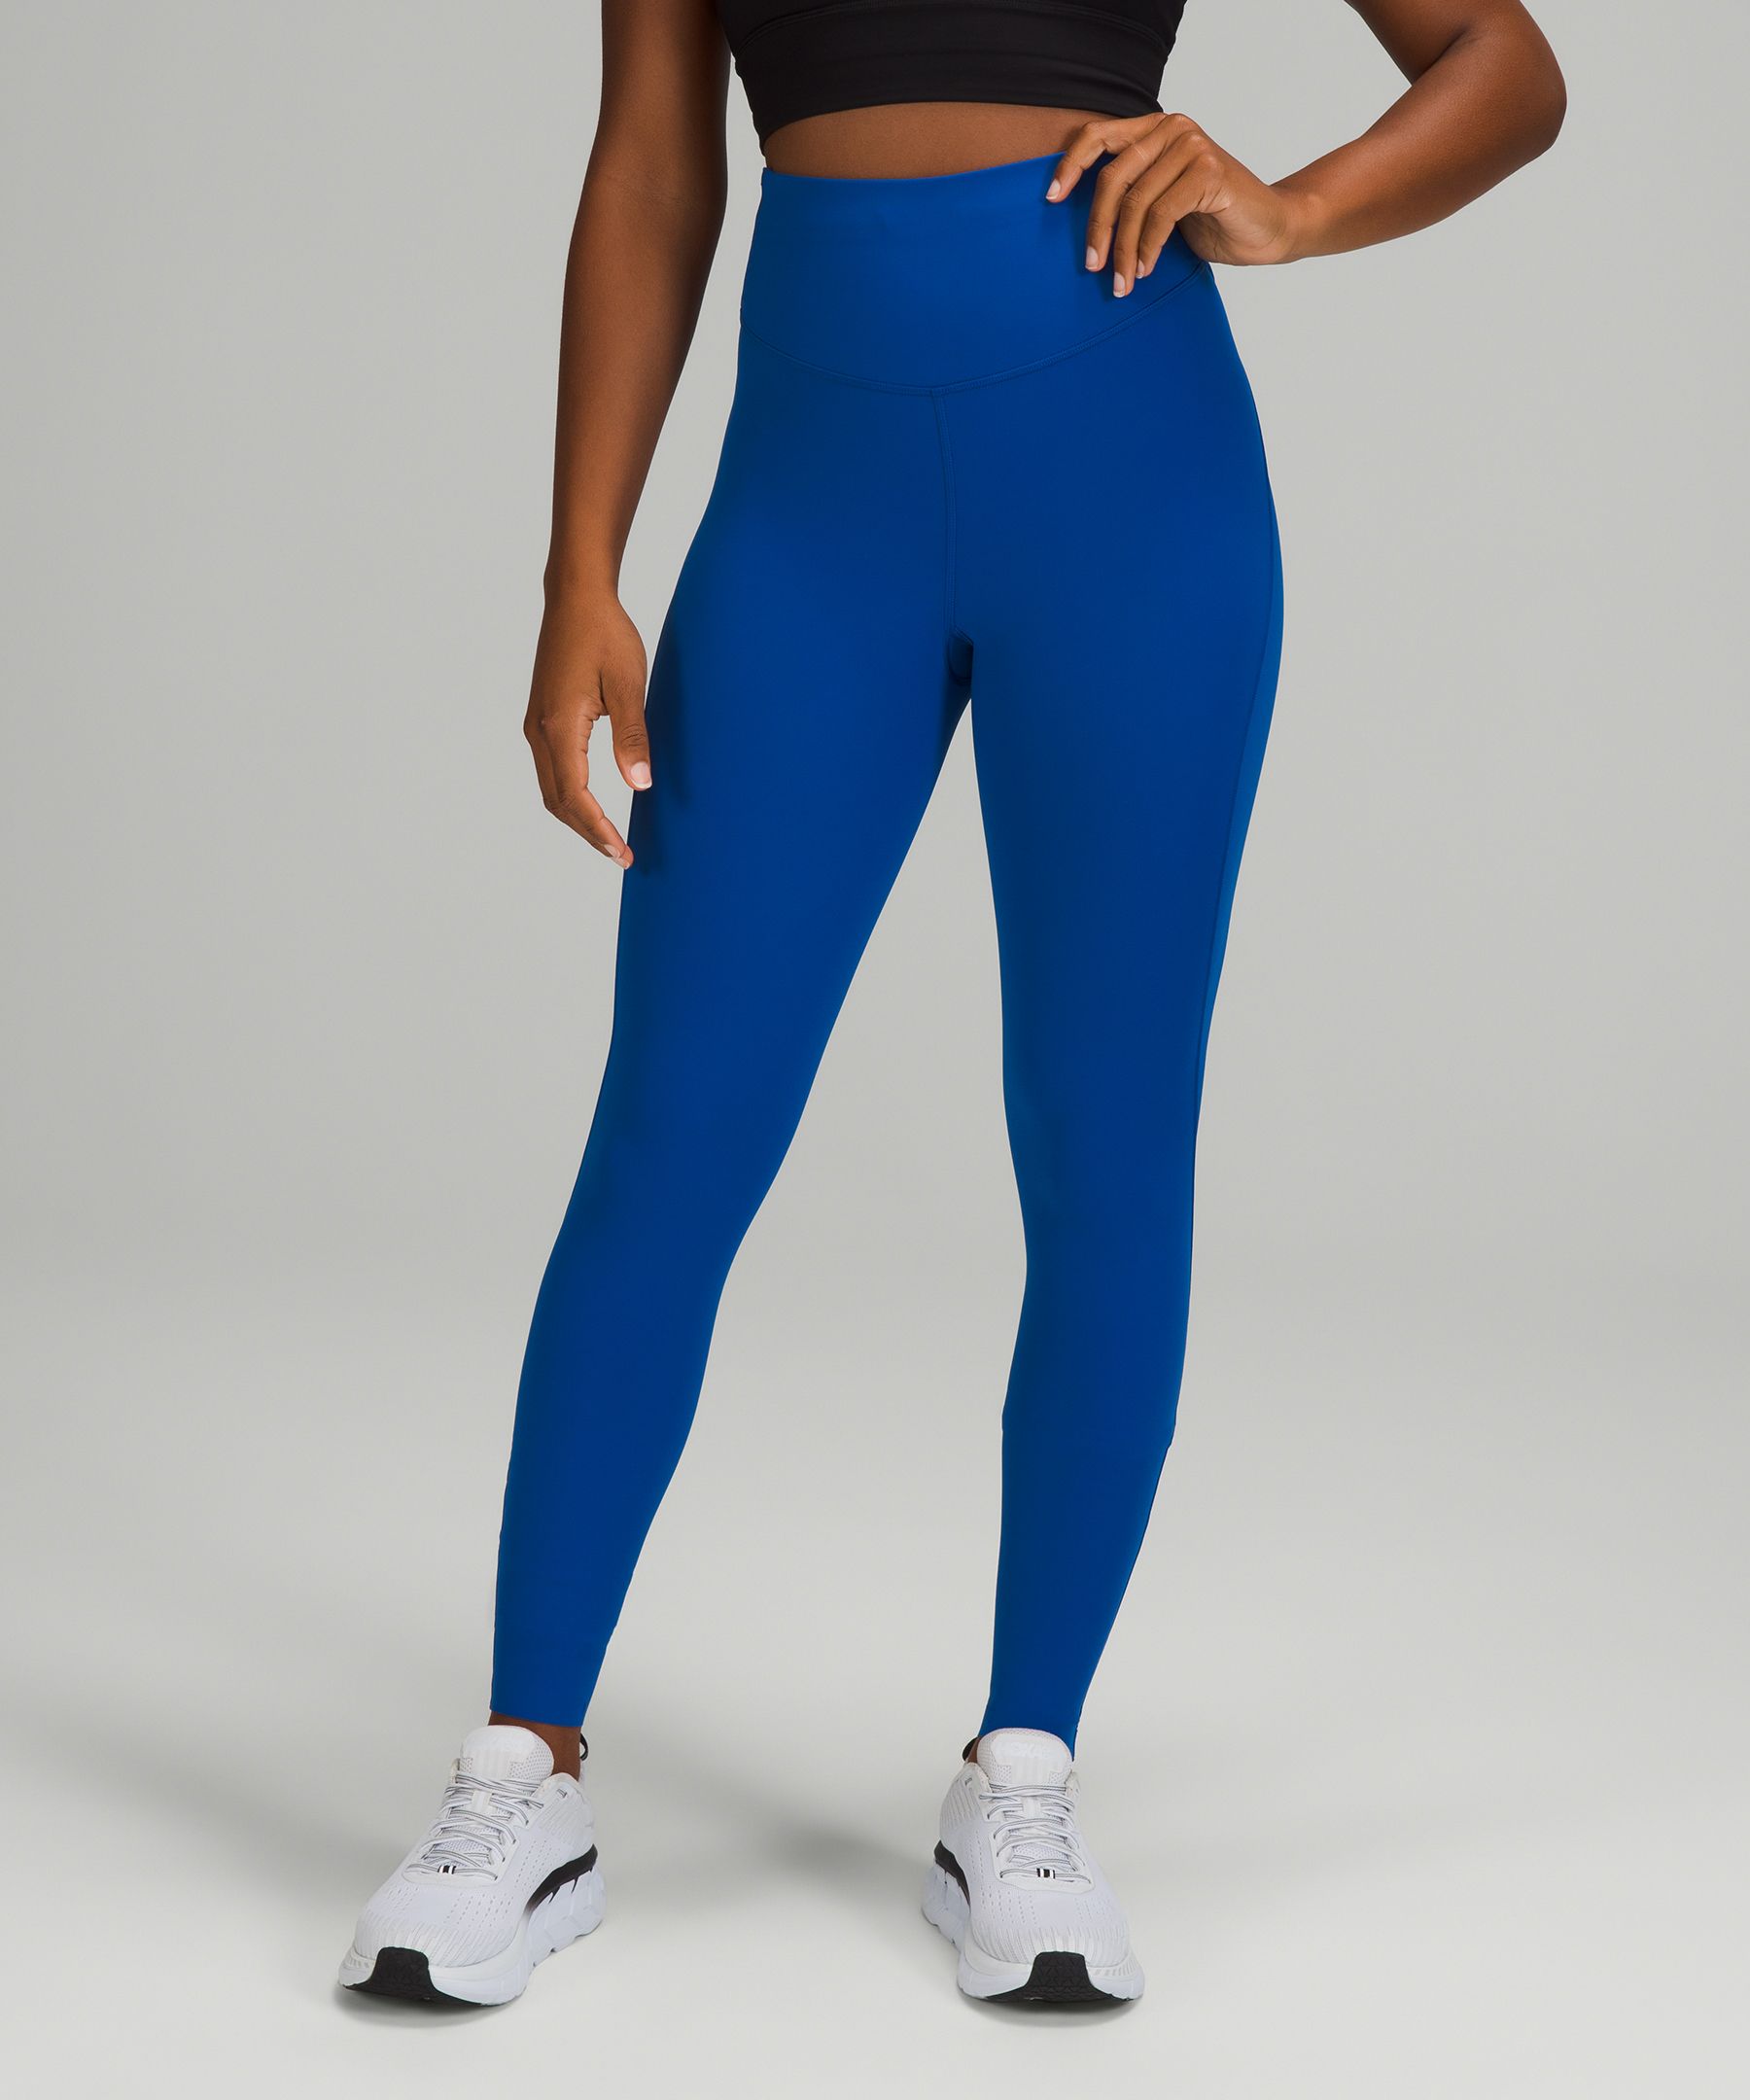 lululemon athletica, Pants & Jumpsuits, Lululemon Zone In Tight Leggings  With Reflective And Mesh Details In Blue Cast